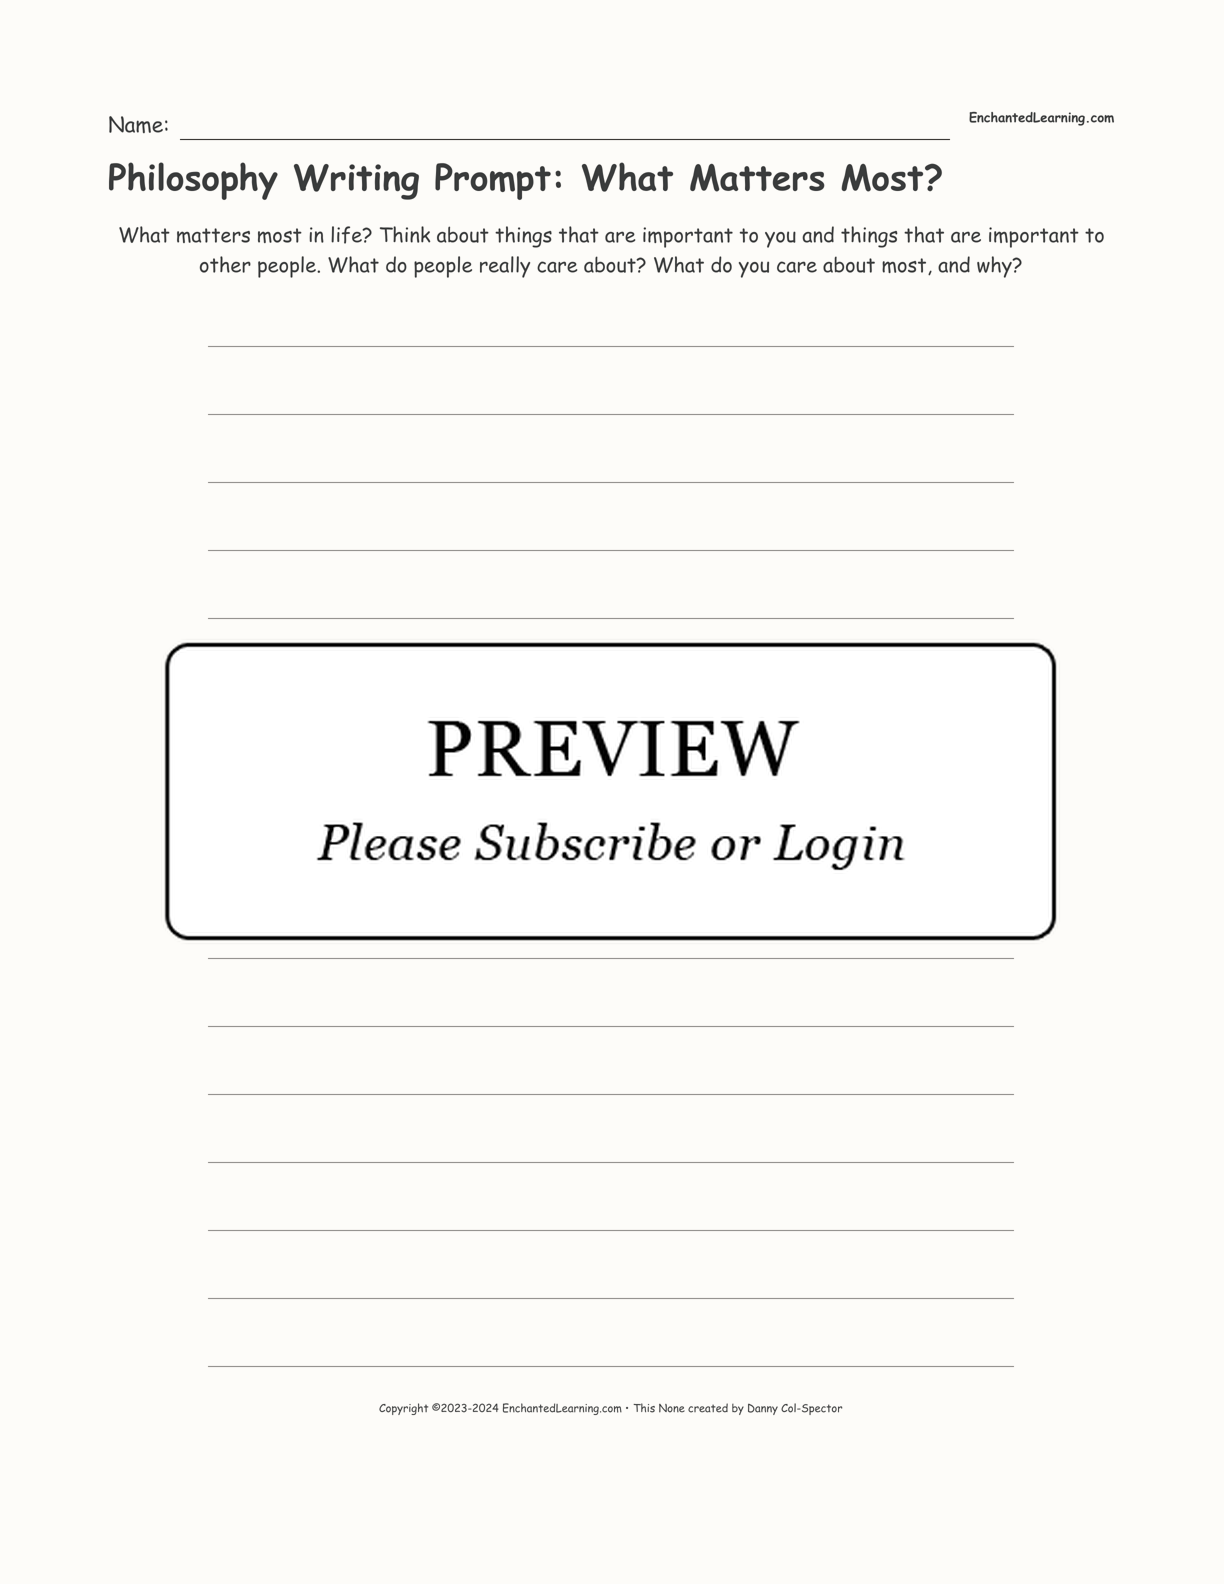 Philosophy Writing Prompt: What Matters Most? interactive printout page 1